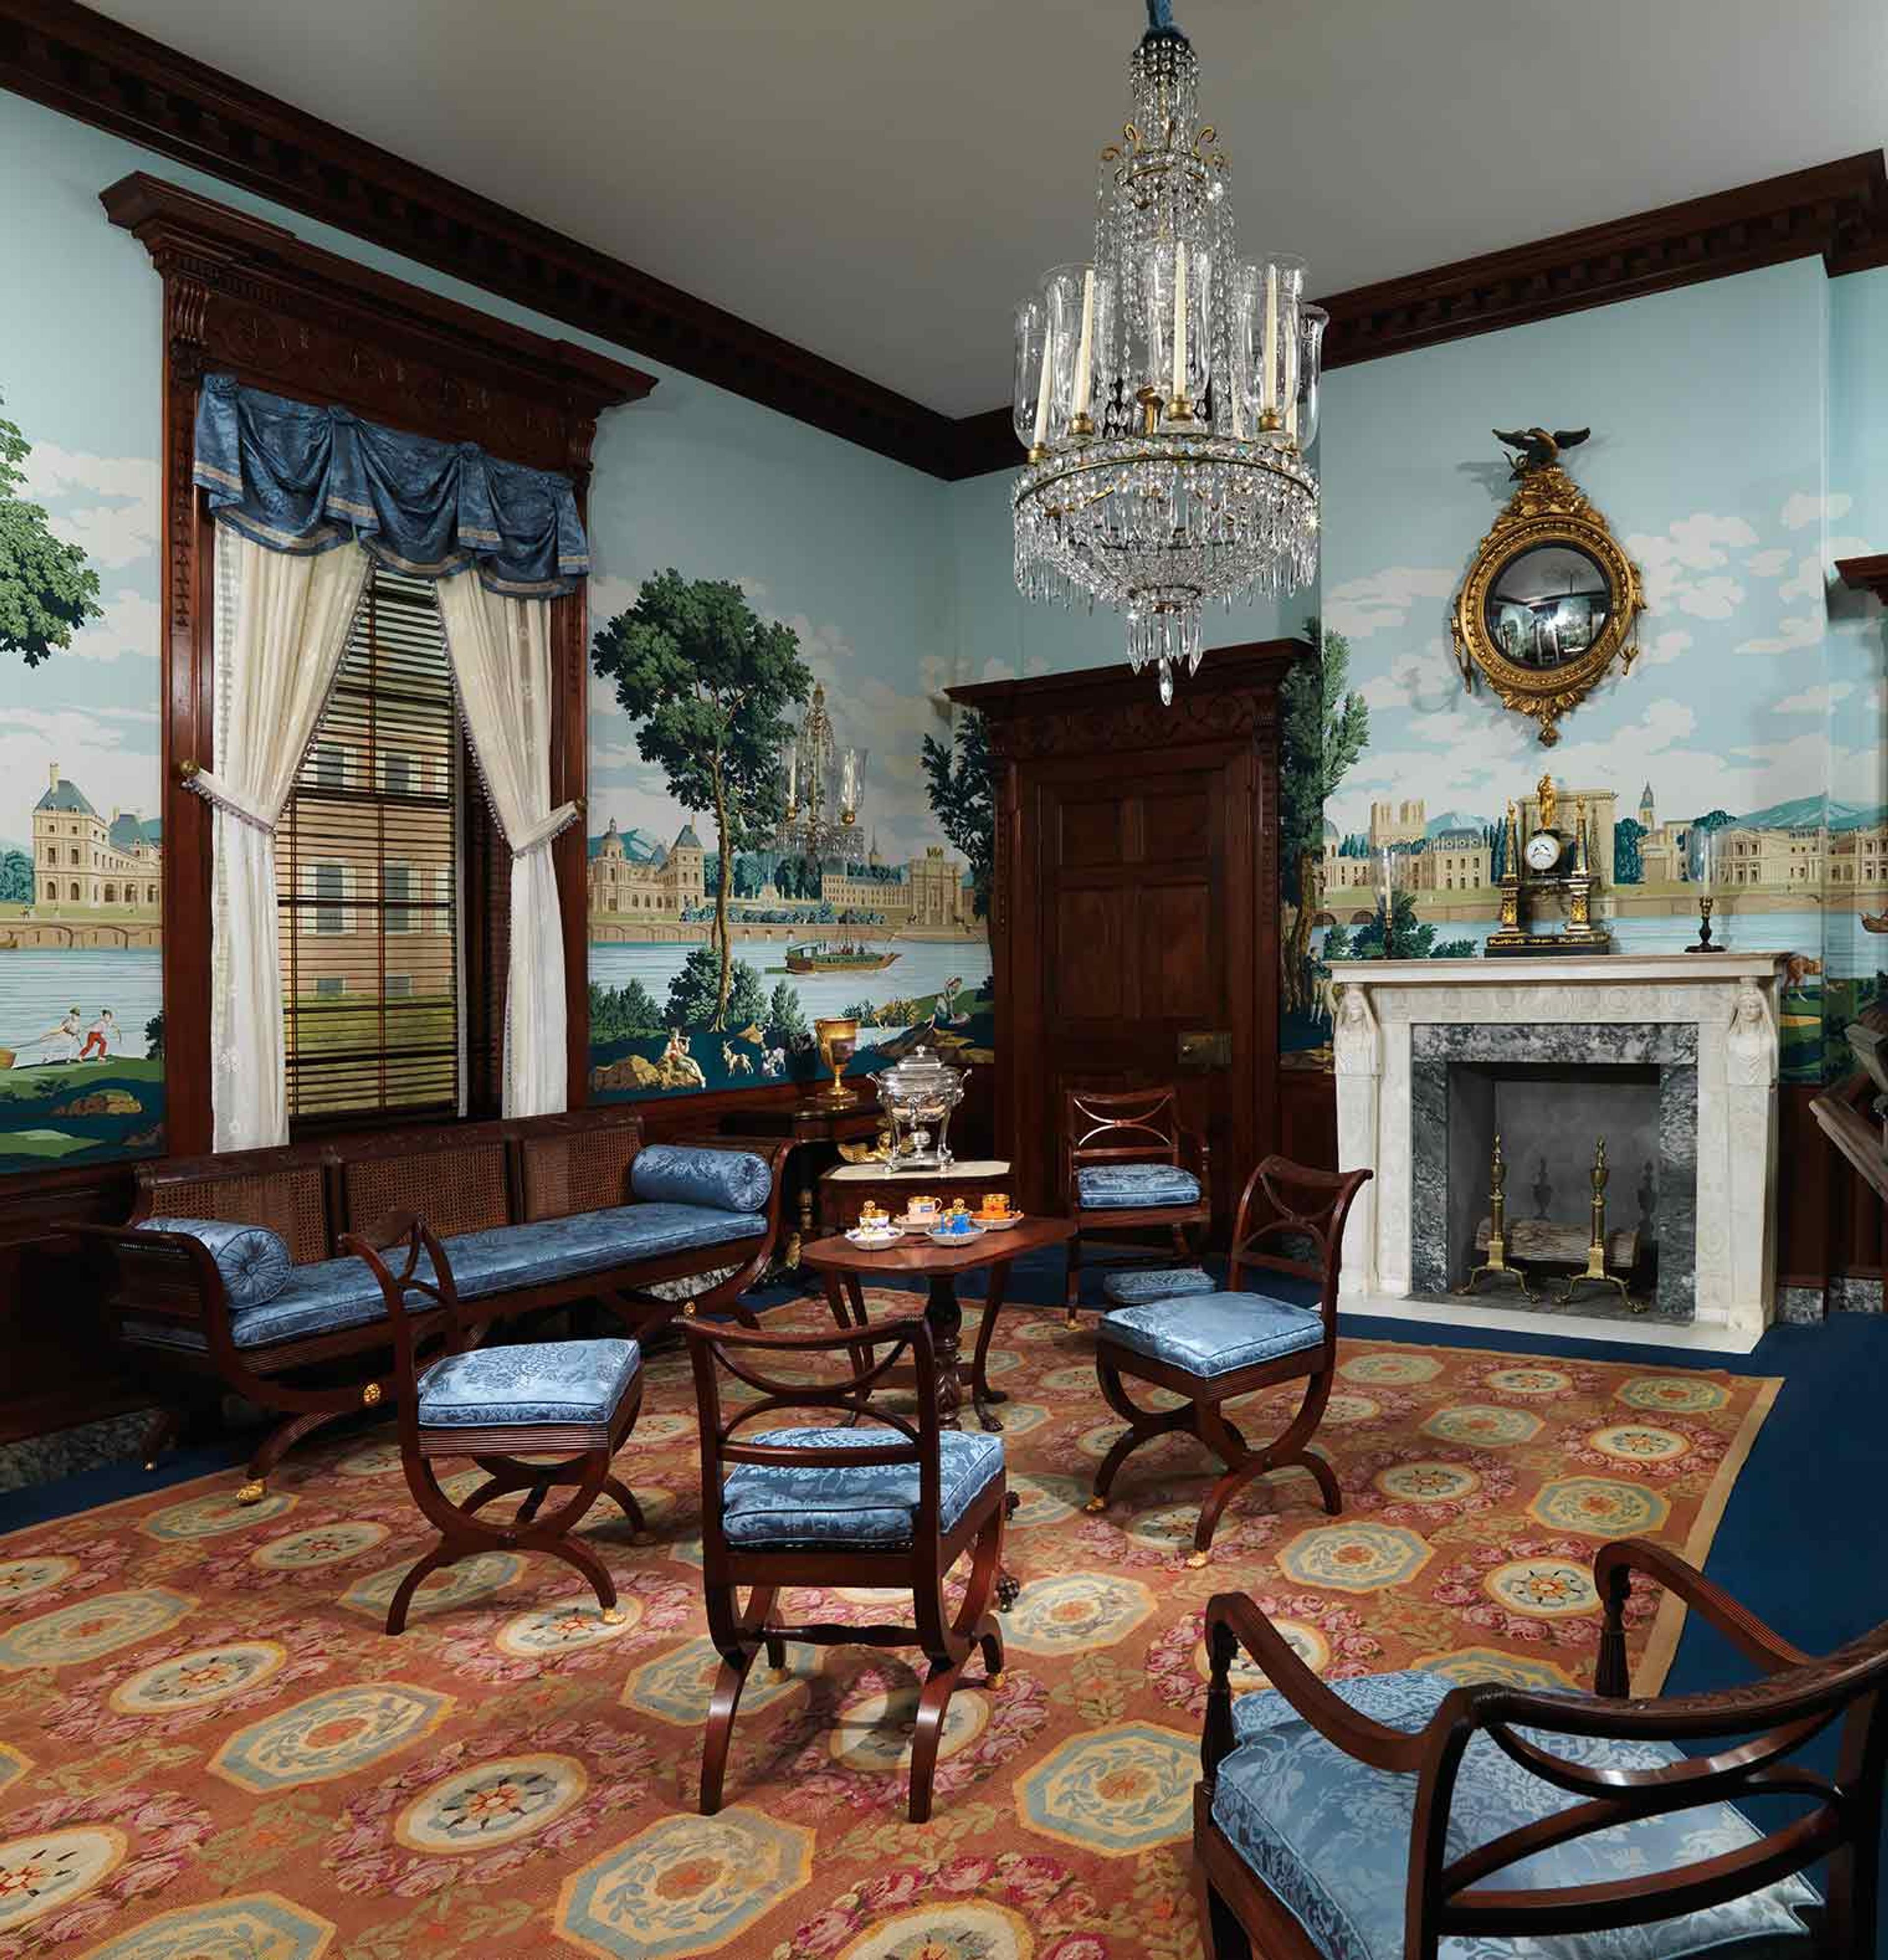 View of the fireplace wall of the Richmond Room